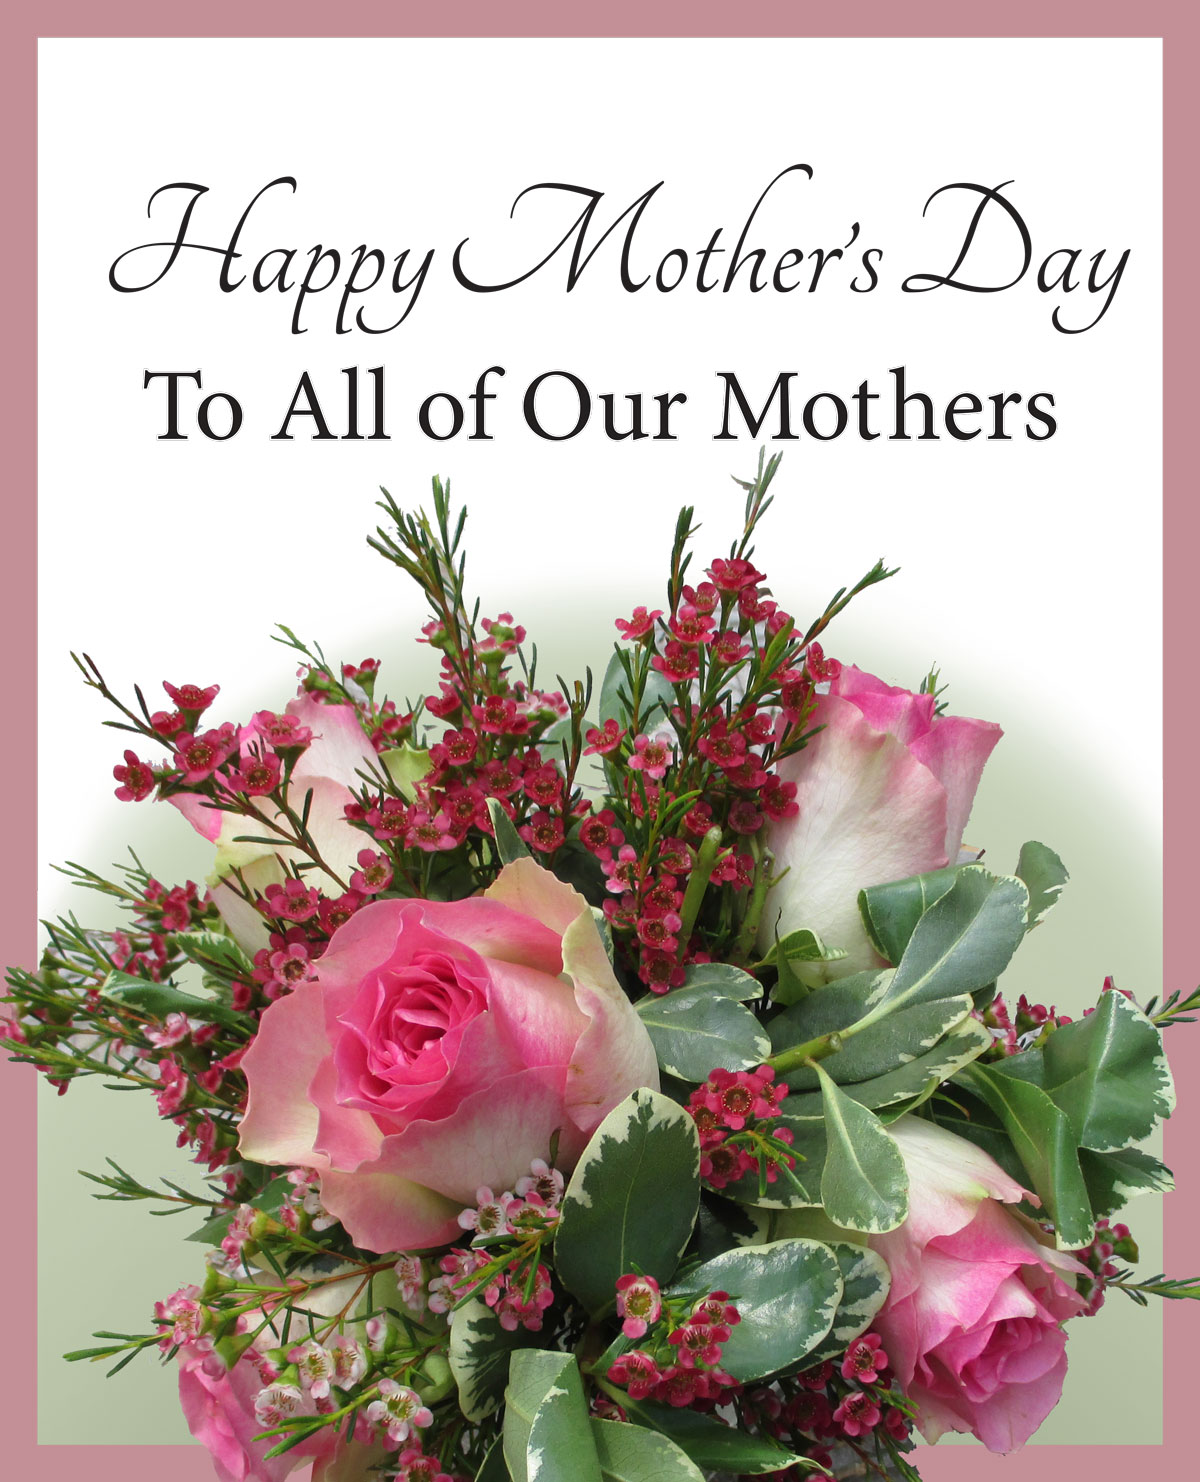 Happy Mother’s Day from Graft-Jacquillard